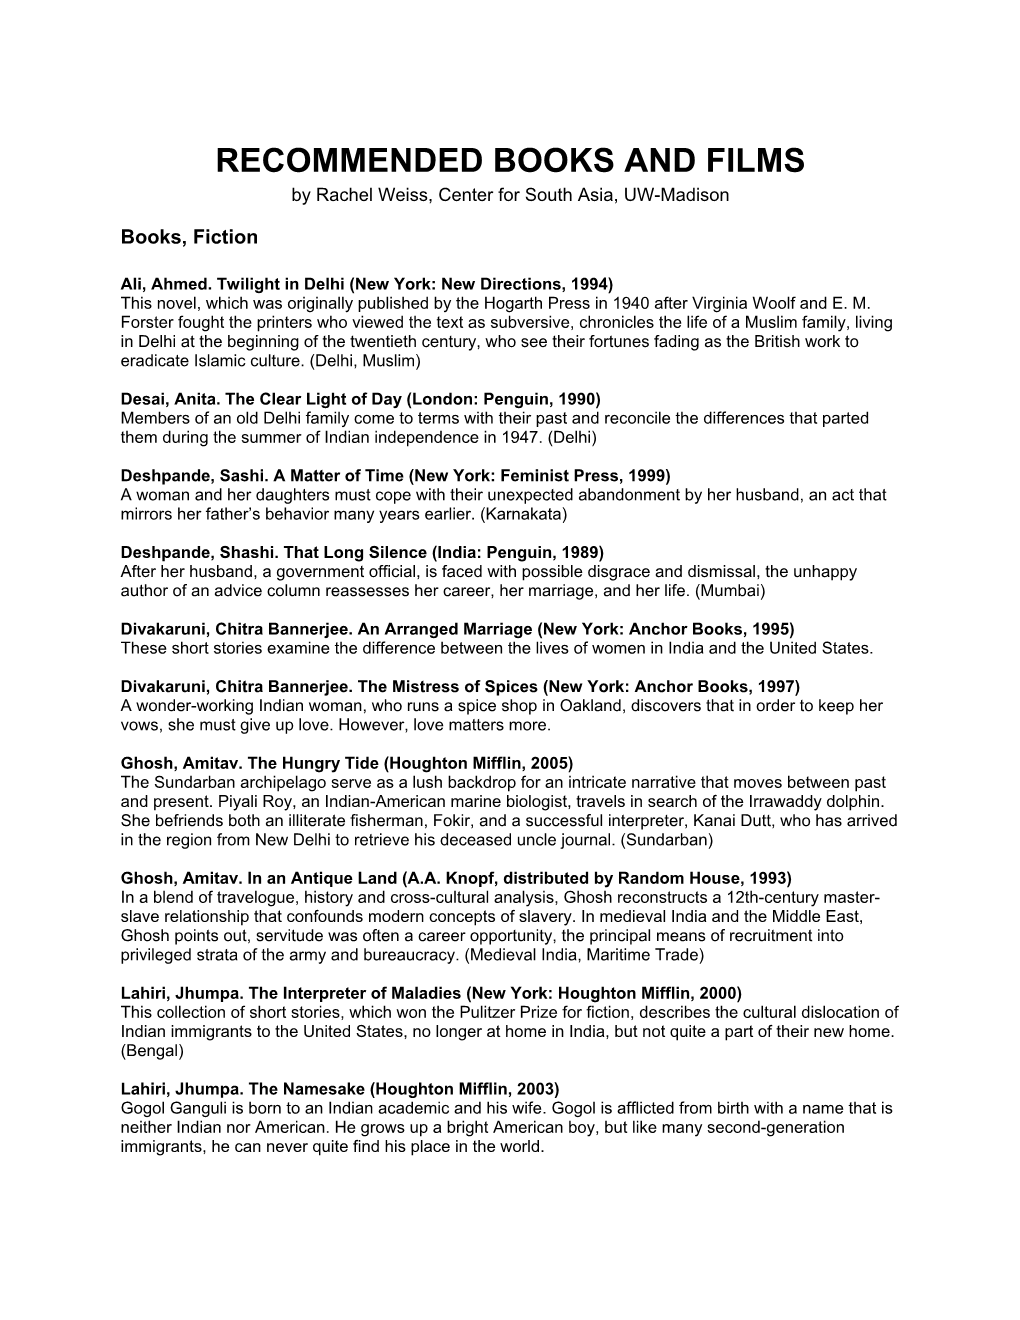 RECOMMENDED BOOKS and FILMS by Rachel Weiss, Center for South Asia, UW-Madison